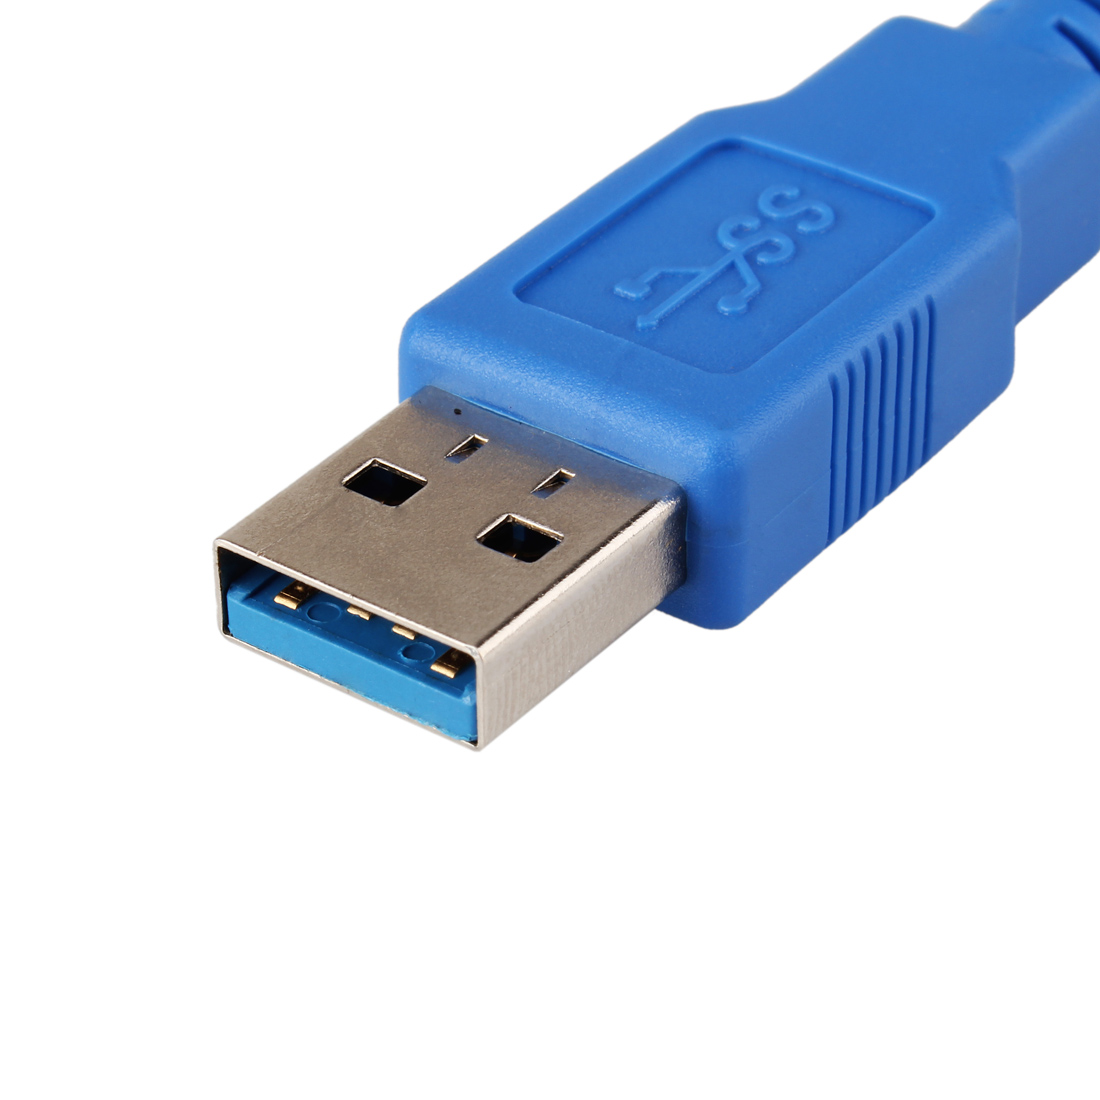 1m-USB-30-Type-A-Male-to-Type-A-Male-USB-Extension-Cable-for-Data-927650